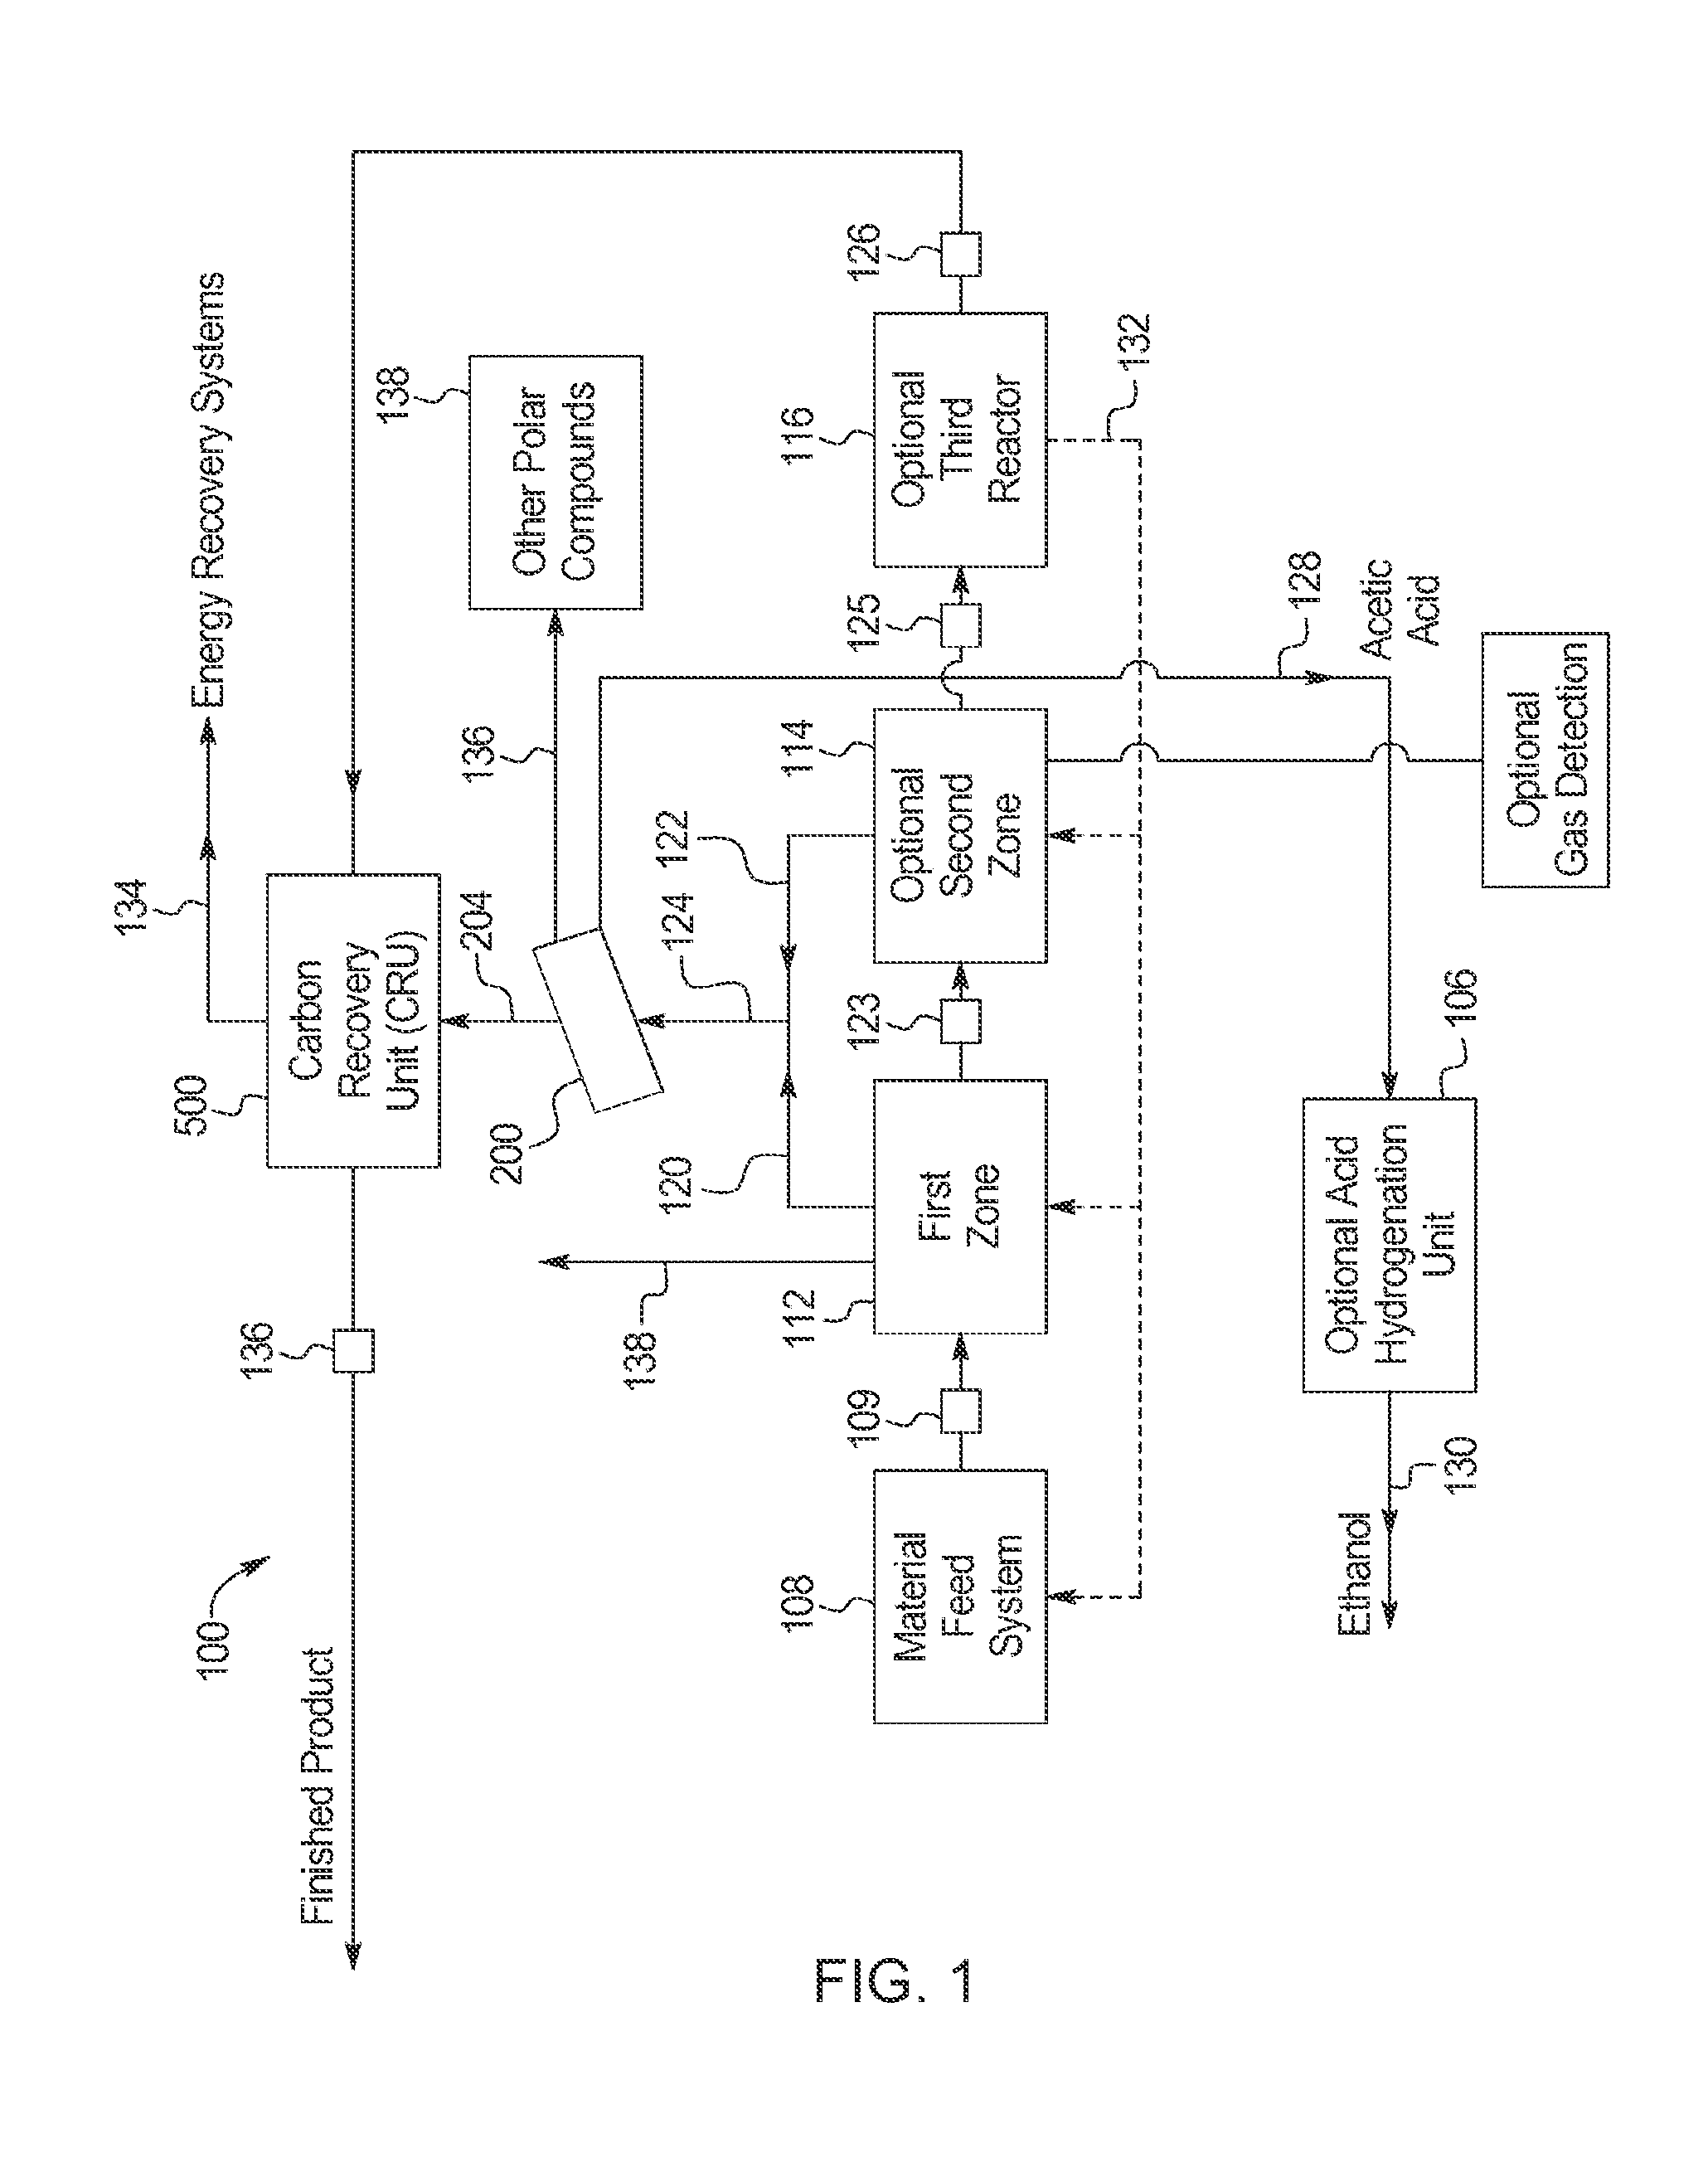 Process for producing high-carbon biogenic reagents